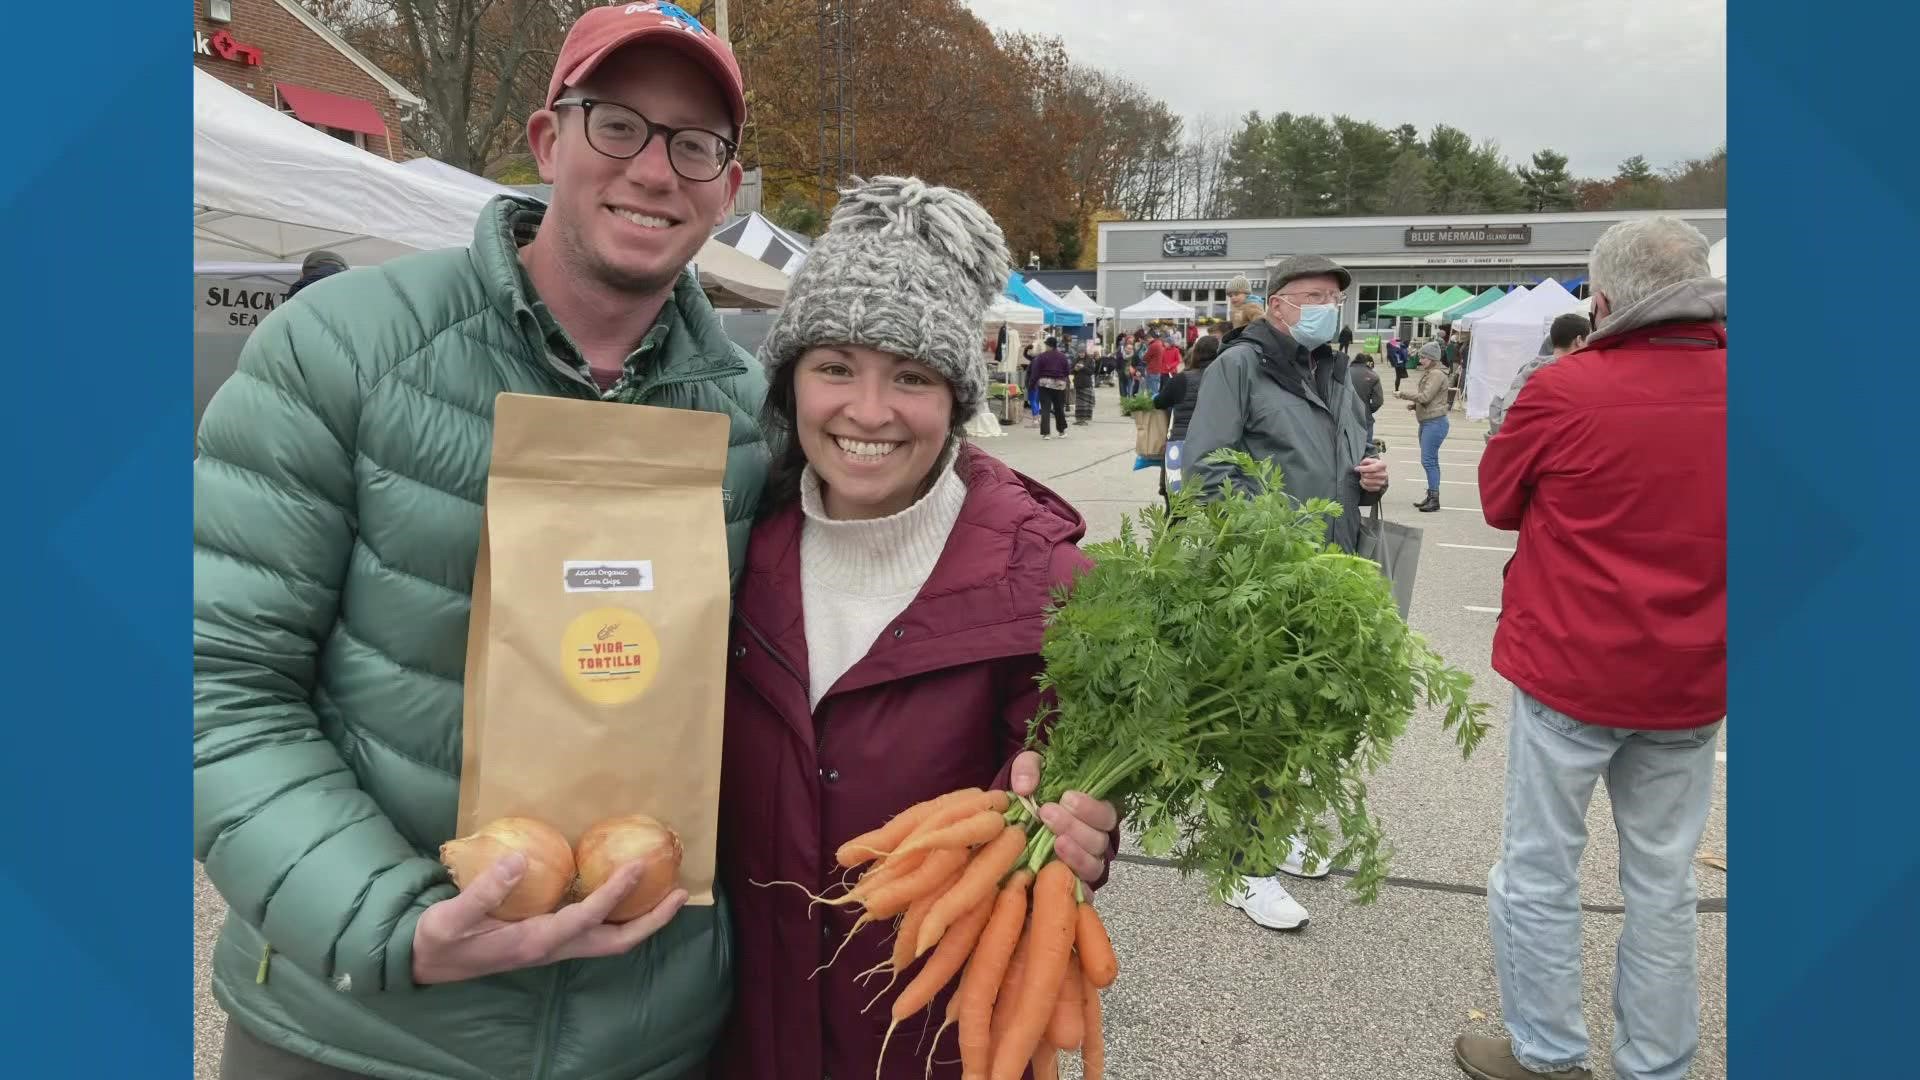 Maine Harvest Bucks provides low-income shoppers who use SNAP-EBT benefits with bonus bucks at farmers’ markets to buy fresh fruits and vegetables from local farms.